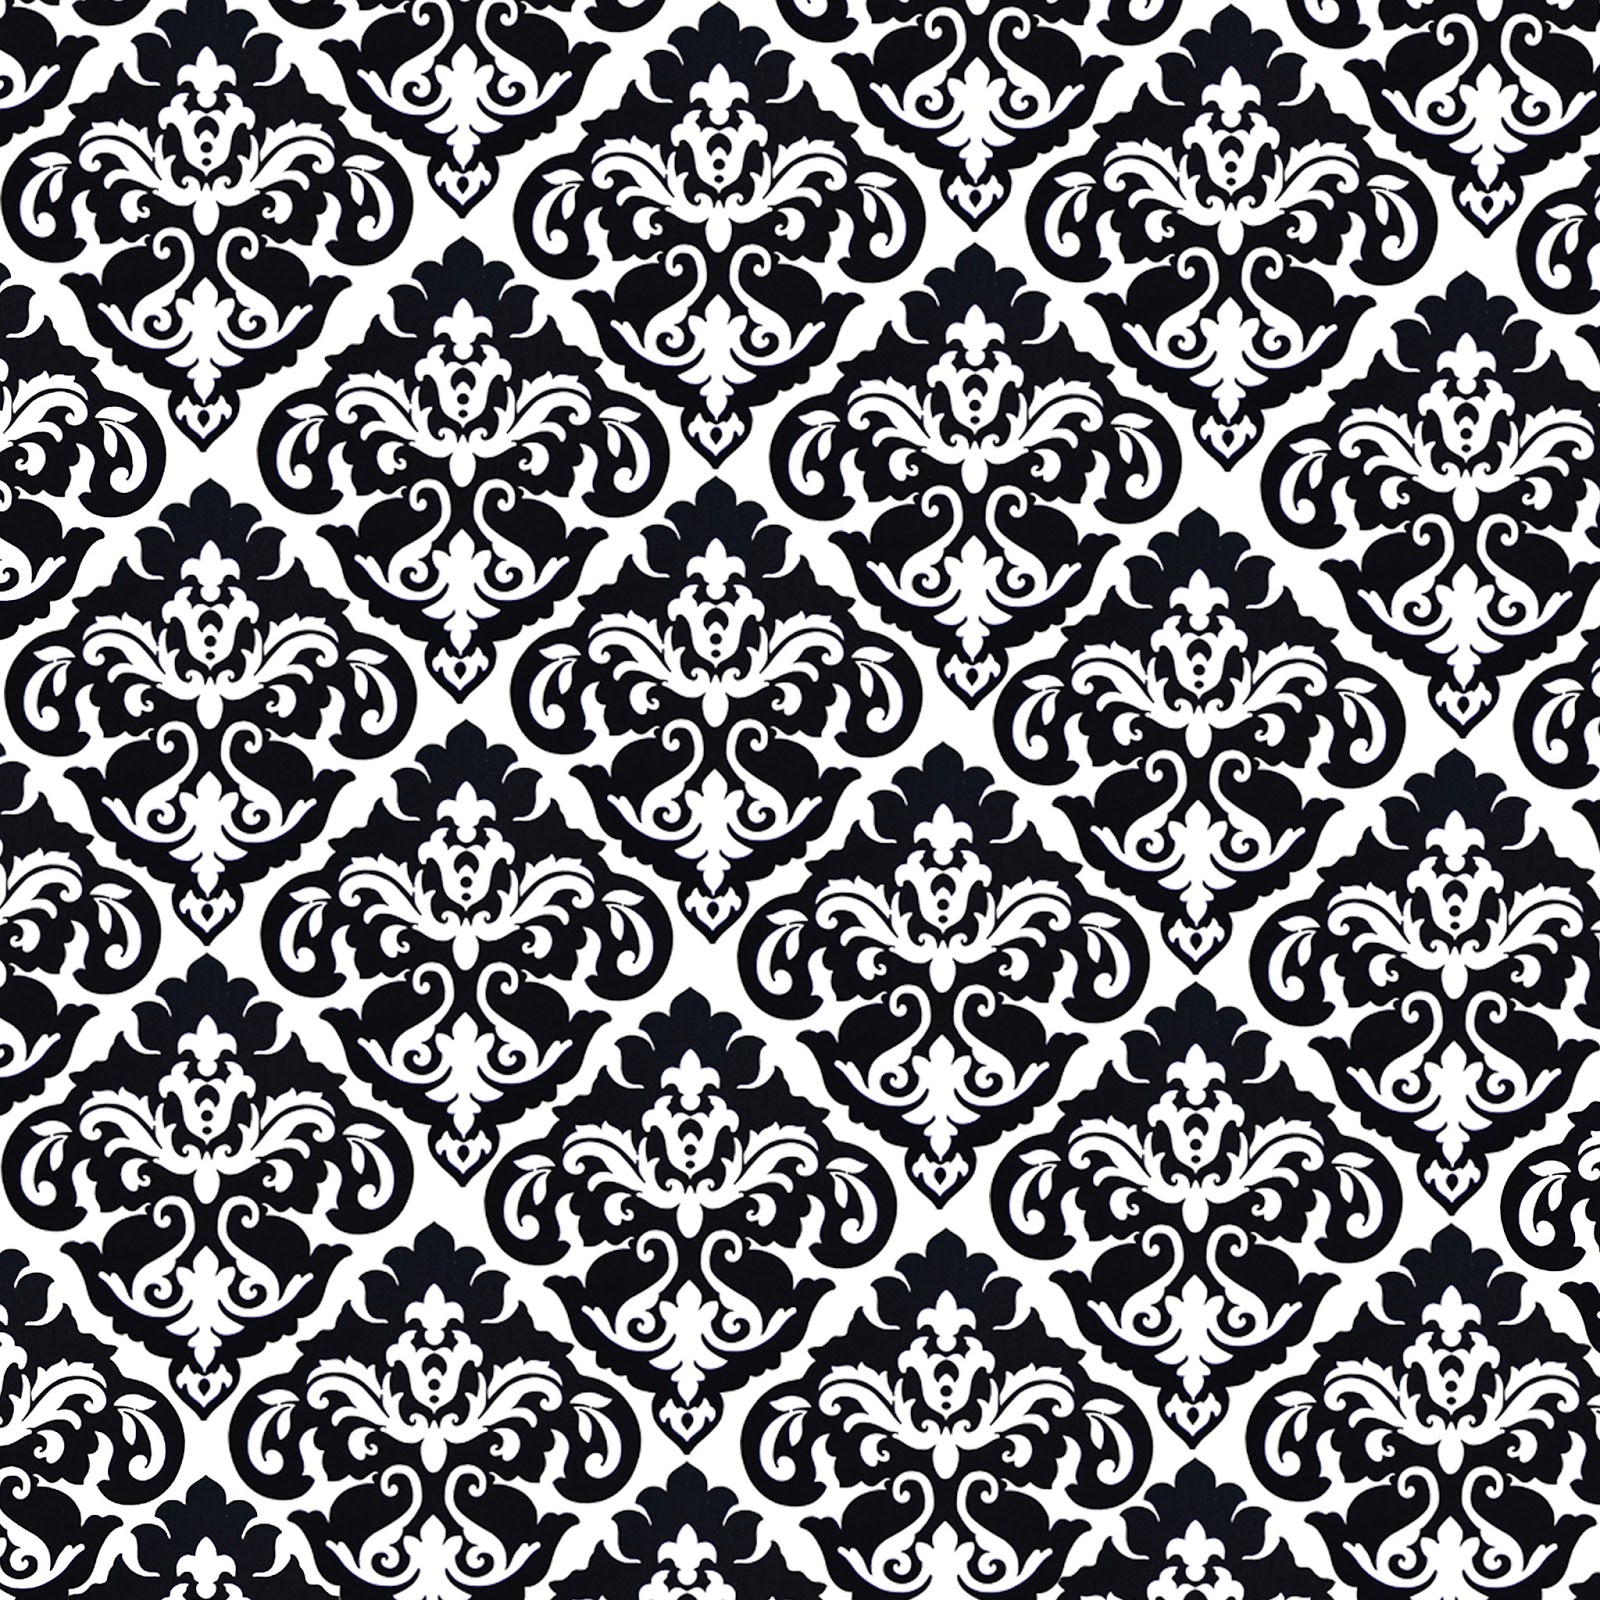 Damask Tight Weave Floral Black And White Background Pattern Jpg